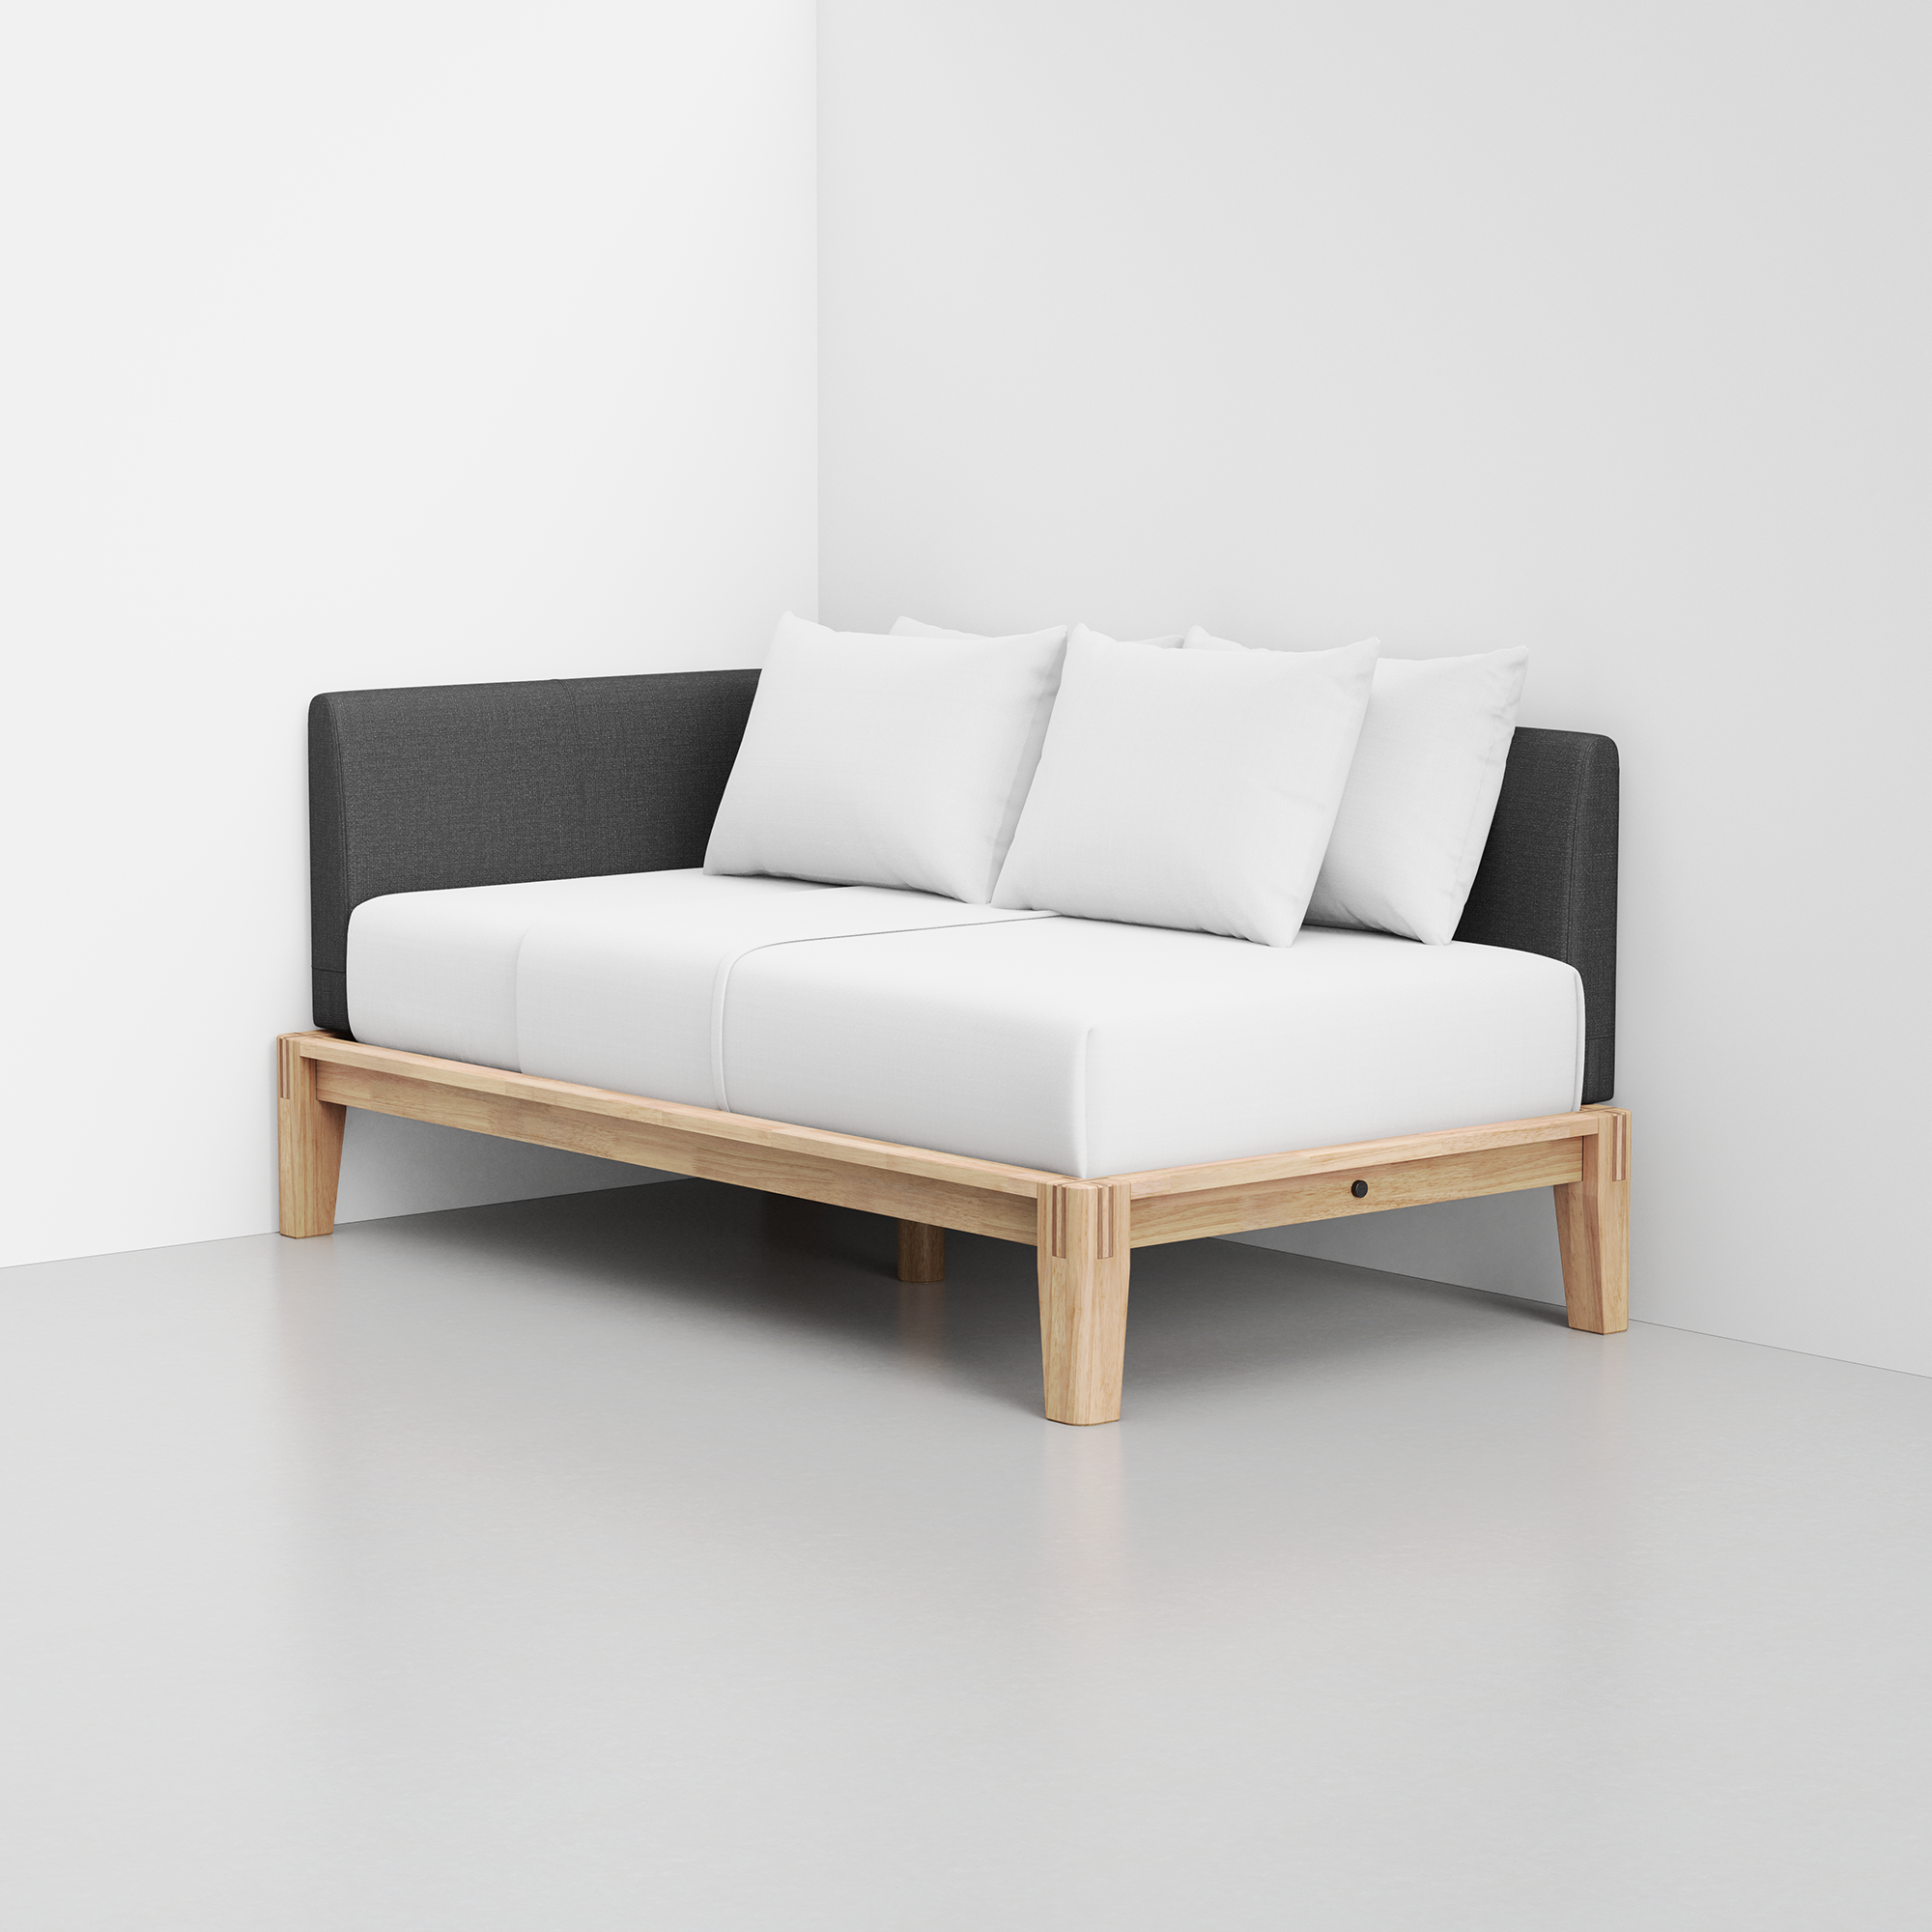 PDP Image: The Daybed (Natural / Dark Charcoal) - Rendering - Pillows Stacked